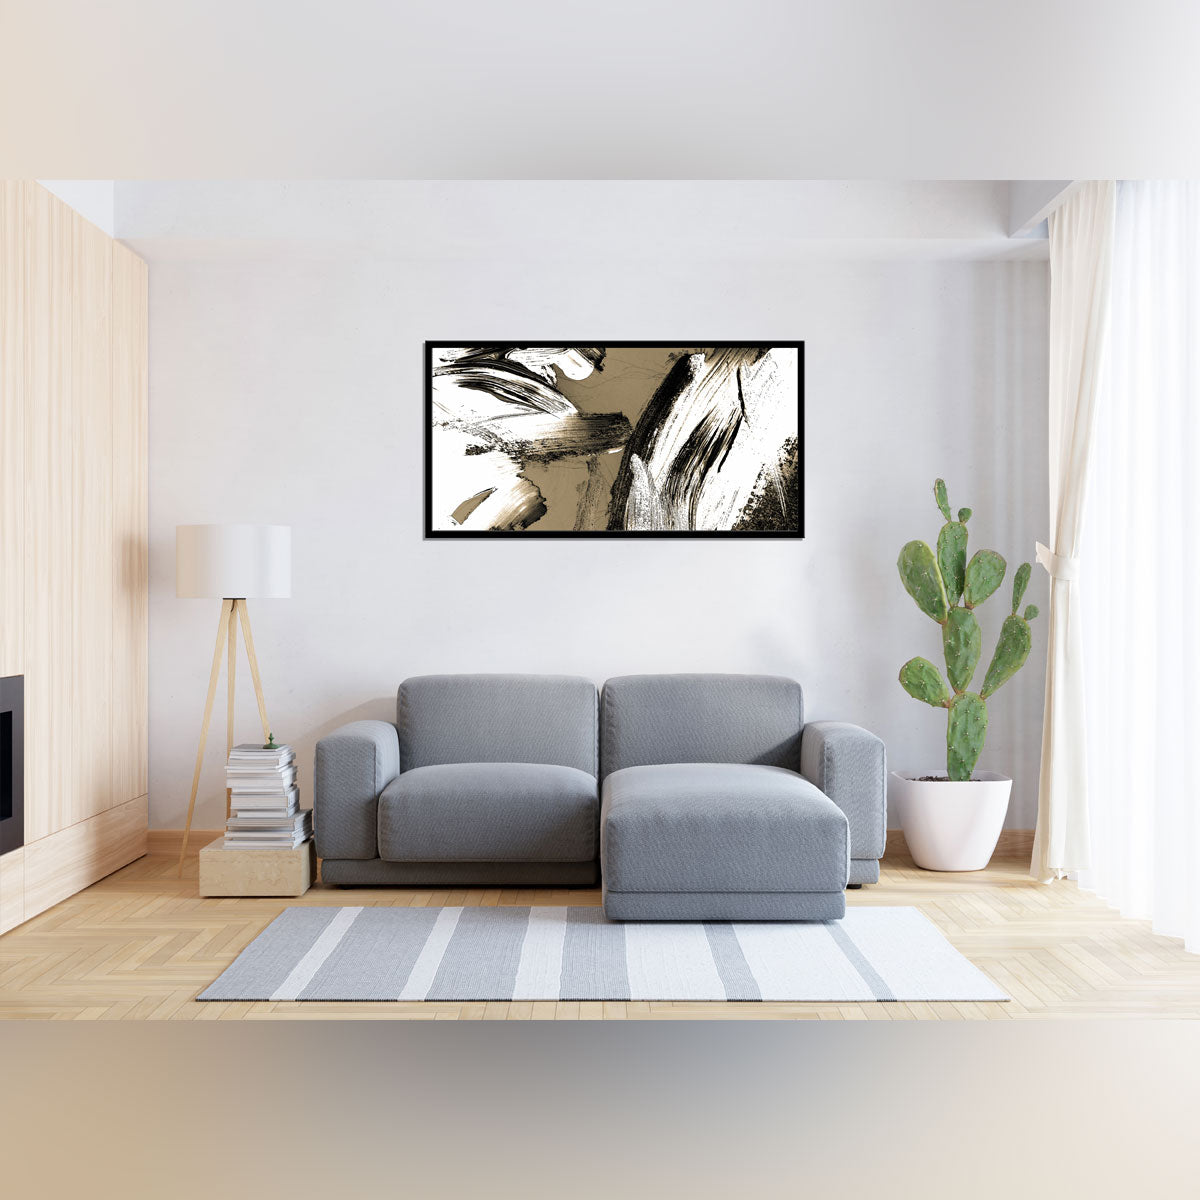 "Elevate Your Space with Metal Acrylic and Dyed Silk Framed Art."